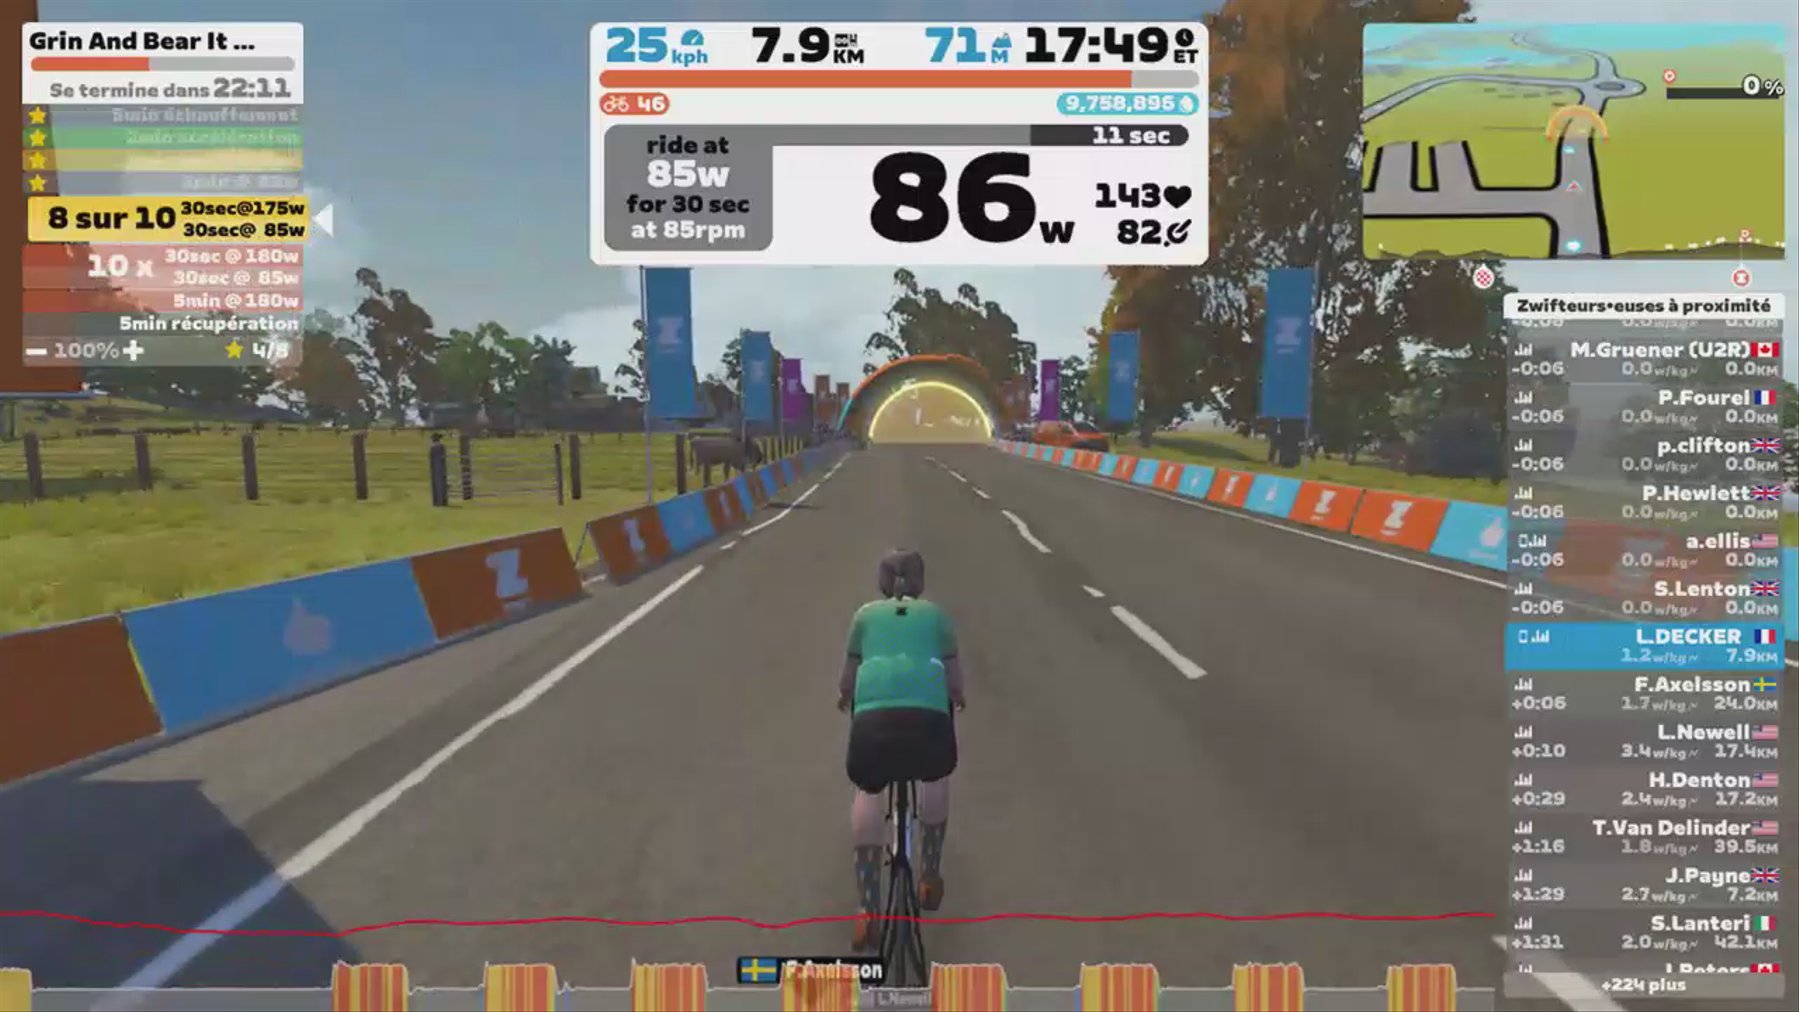 Zwift - Grin And Bear It on Glasgow Crit Circuit in Scotland